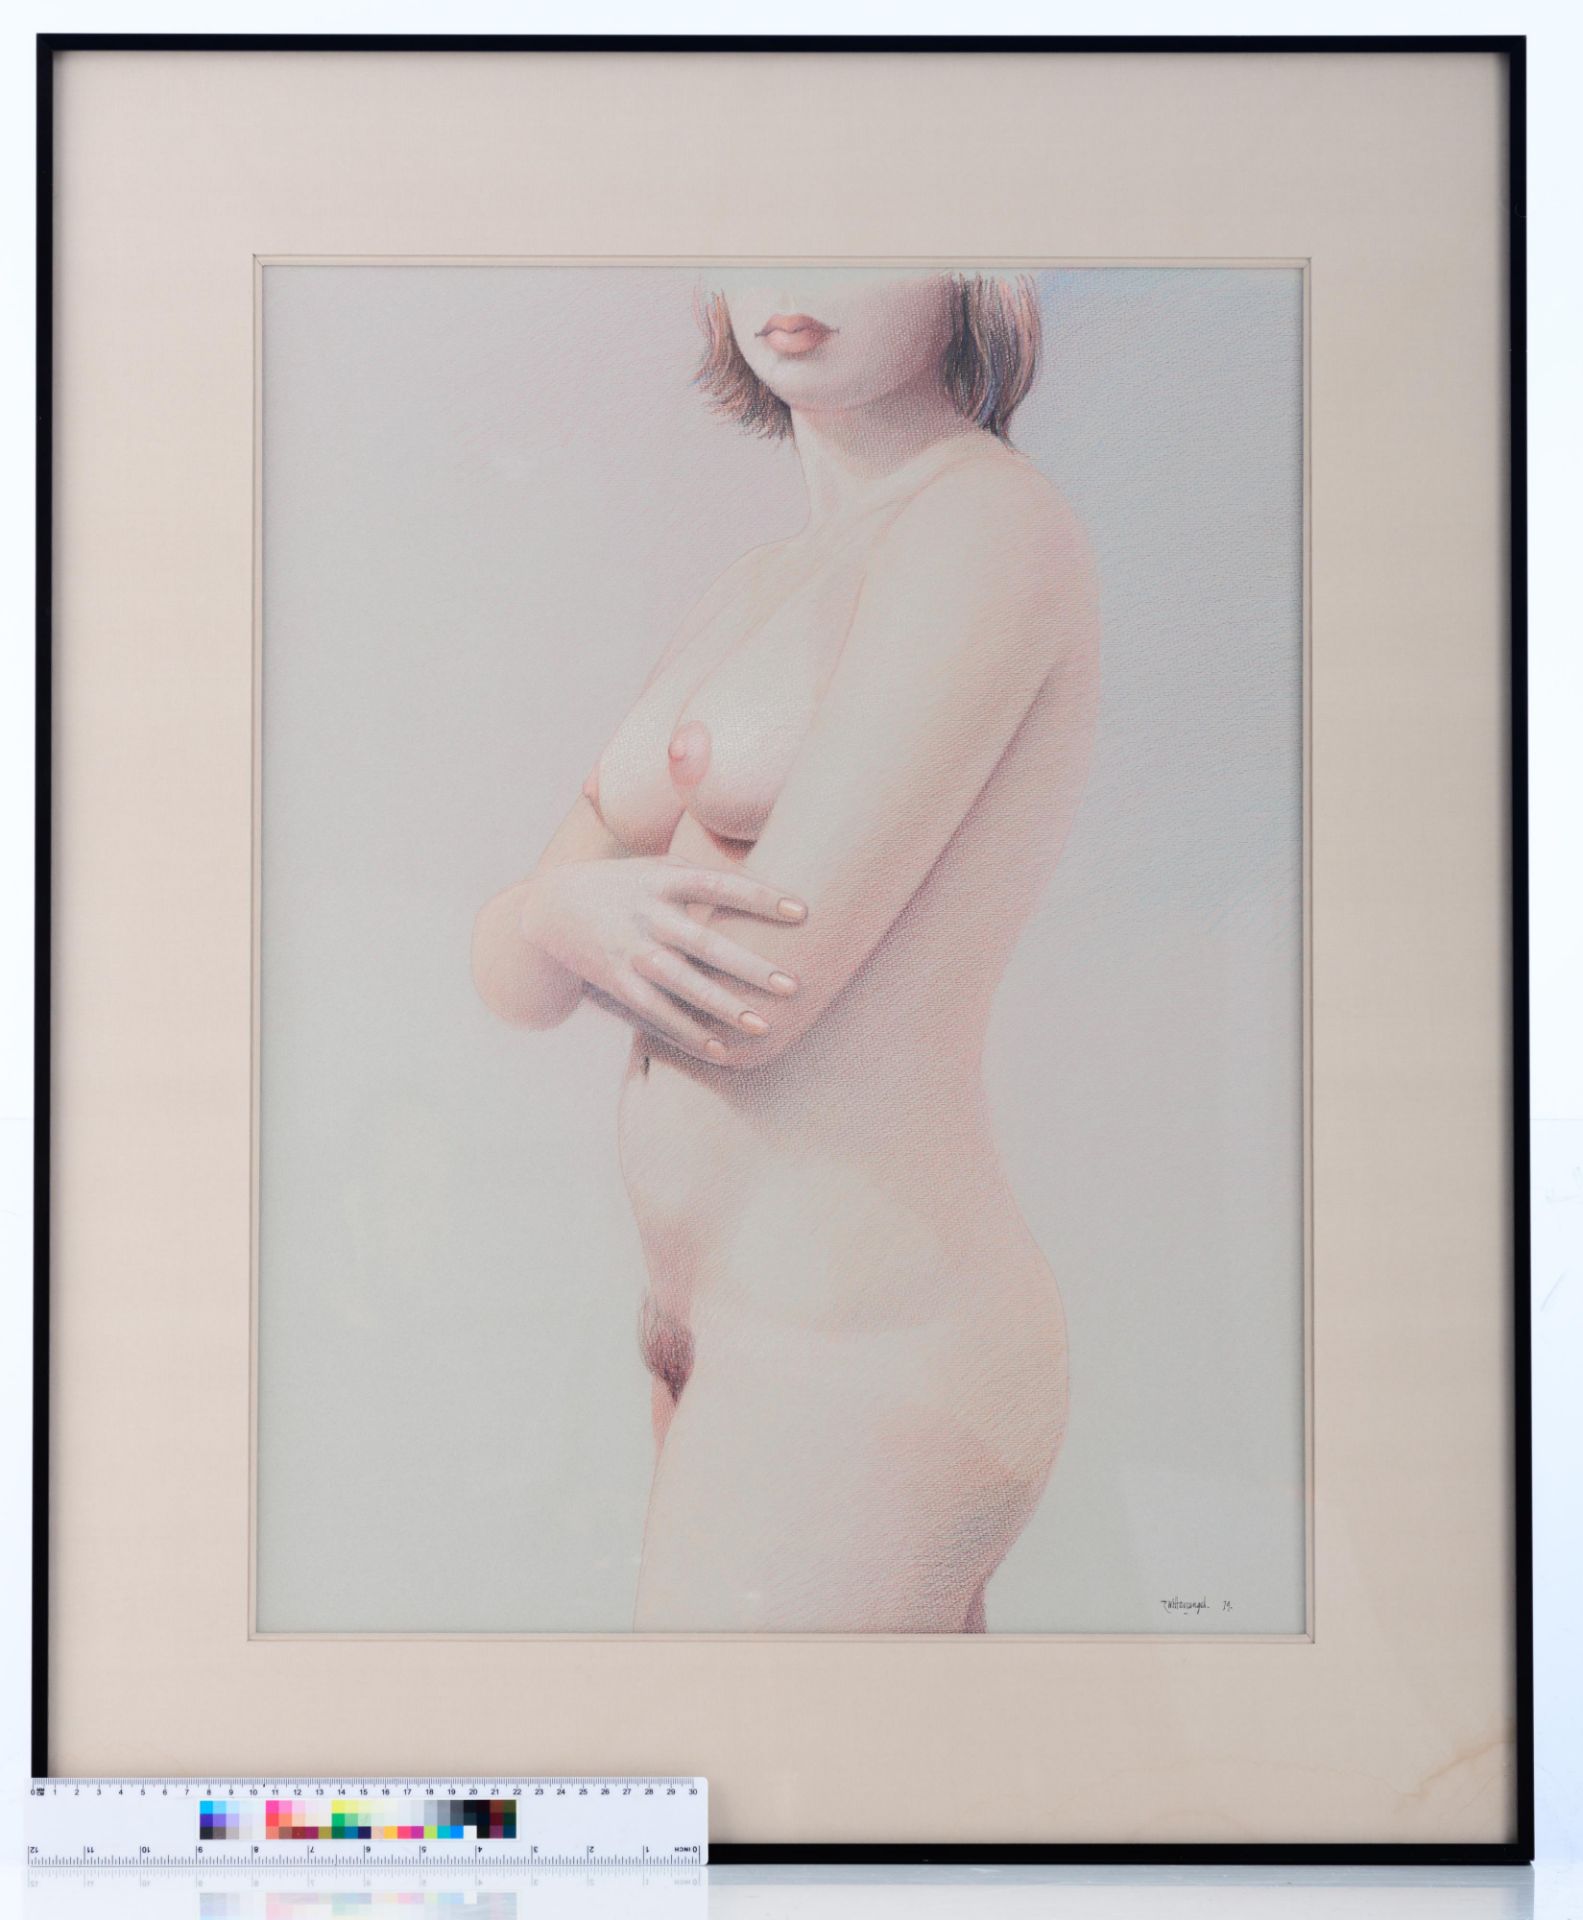 Wittevrongel R., two female nudes, dated (19)79, pastel on paper, 48 x 64 - 54 x 71 cm, Is possibly - Image 8 of 9